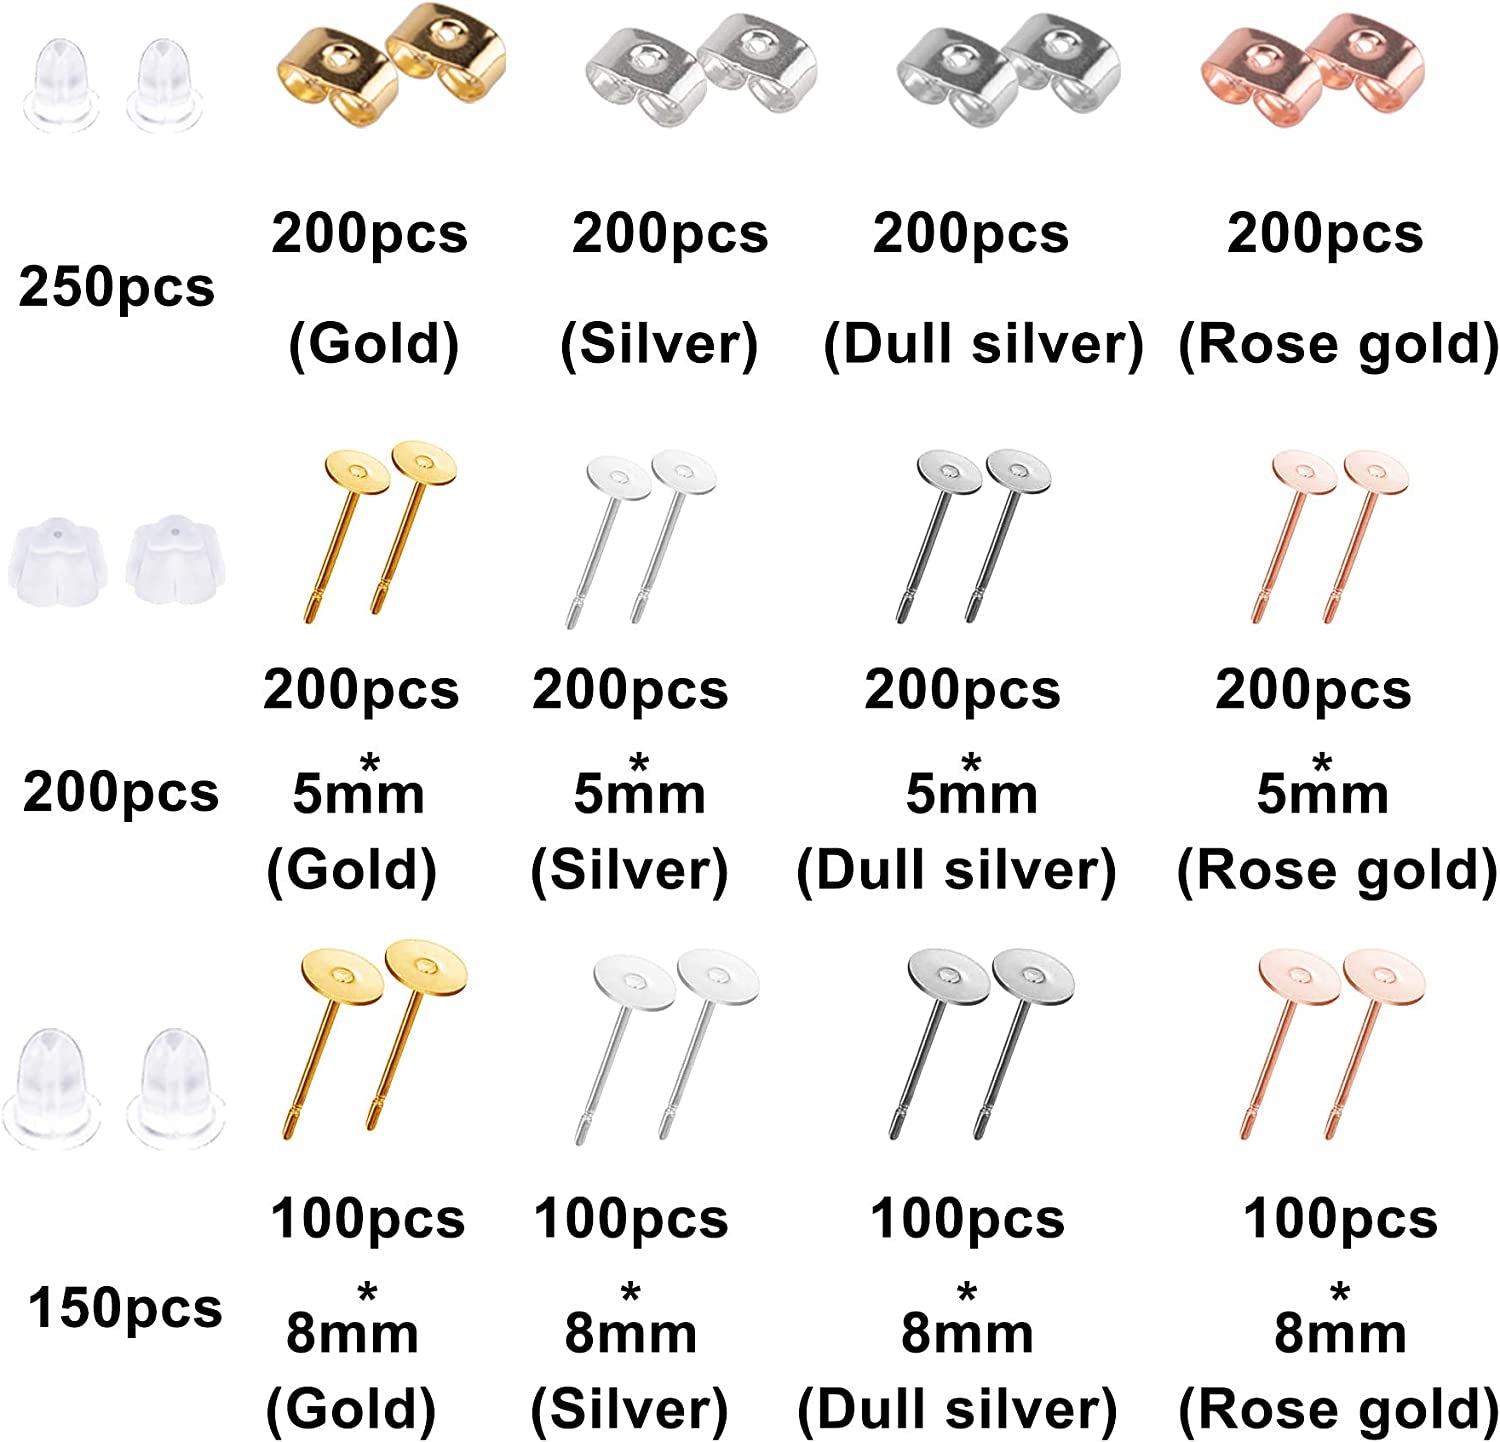 2600 Pcs Earring Making Supplies with Stainless Steel Earring Posts Earring Backs Flat Pad Earring Studs Earring Blank with Butterfly and Rubber Bullet Earring Backs for Earring Jewelry Making